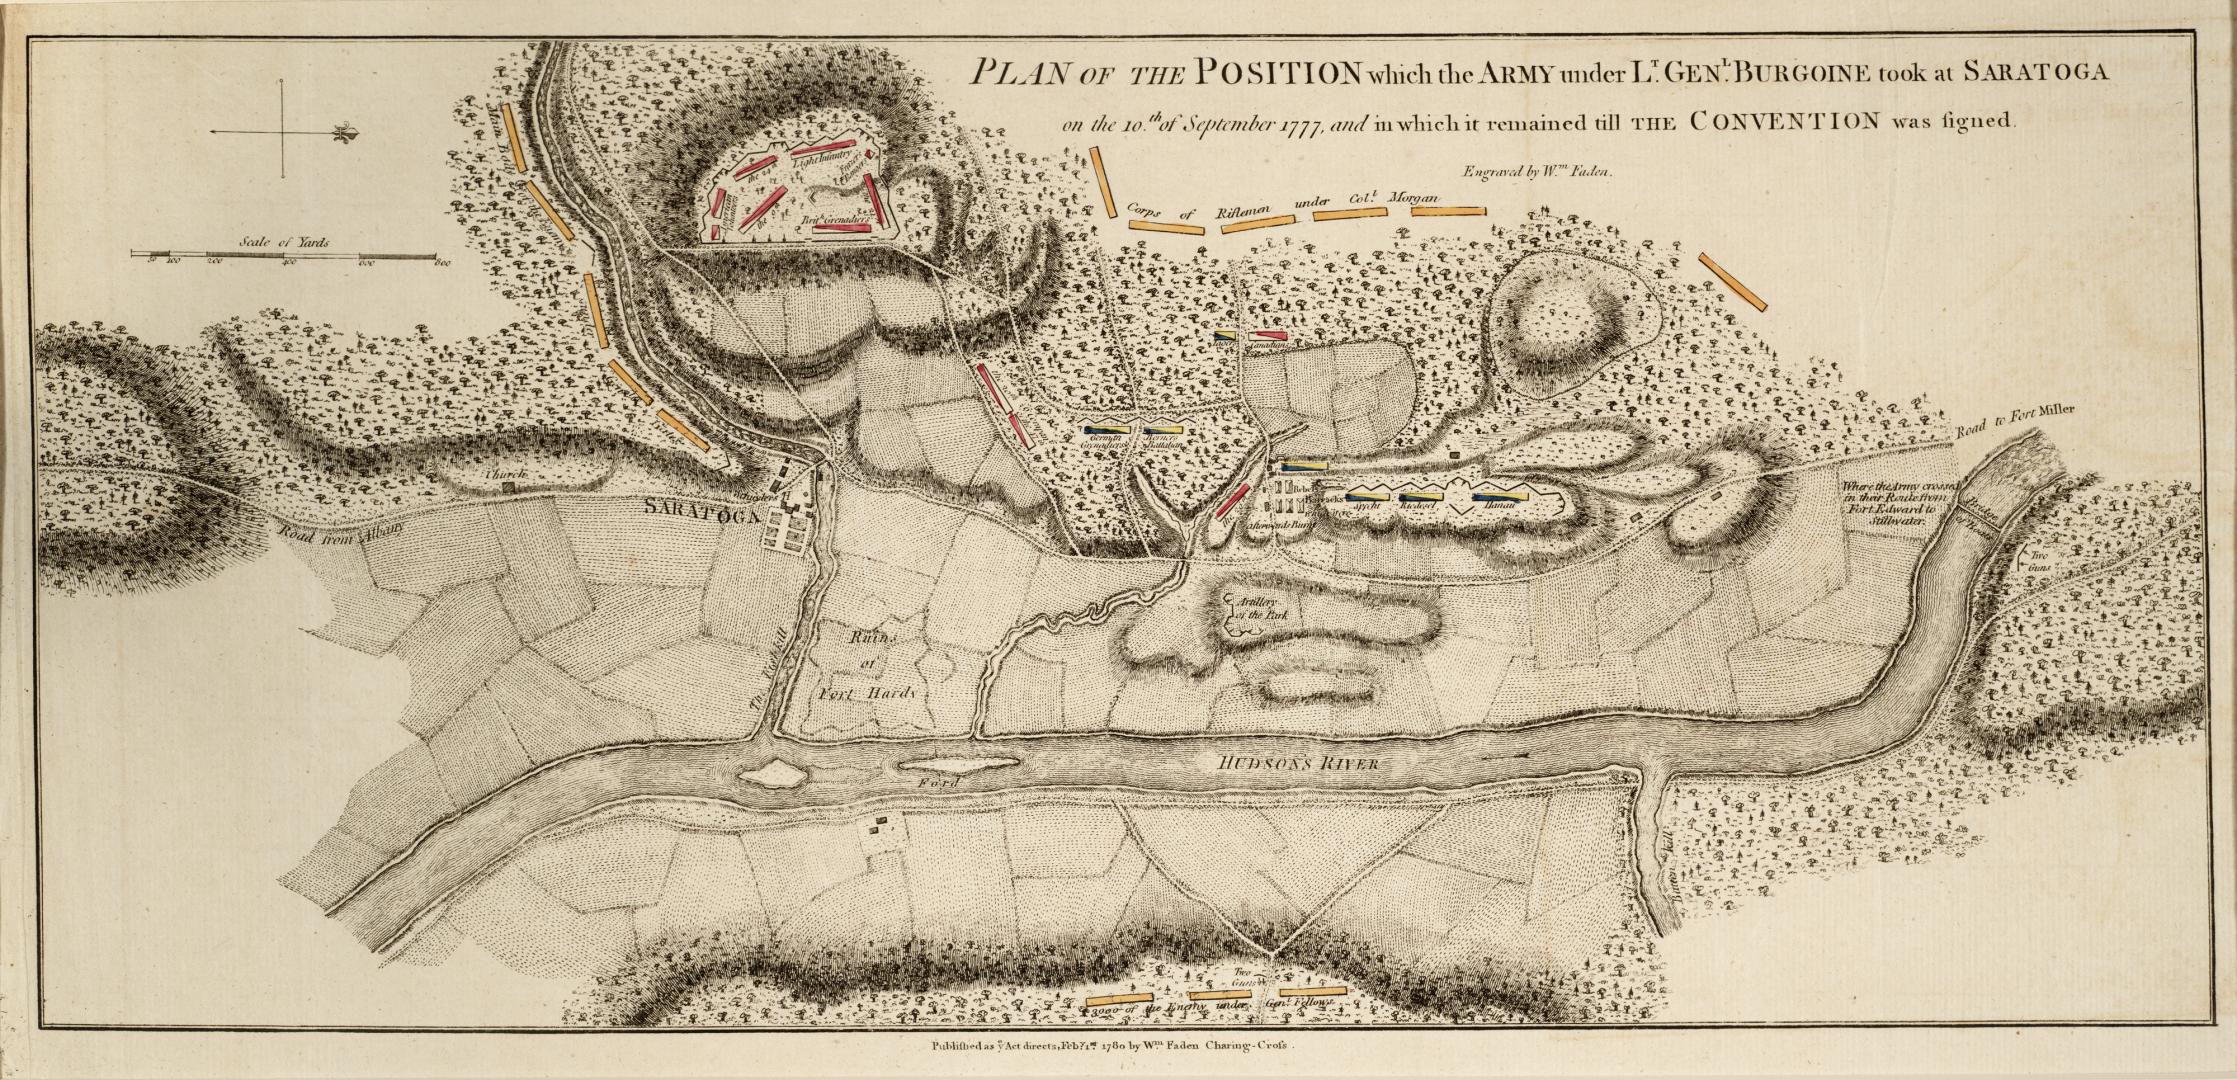 Plan of the position which the army under Lt